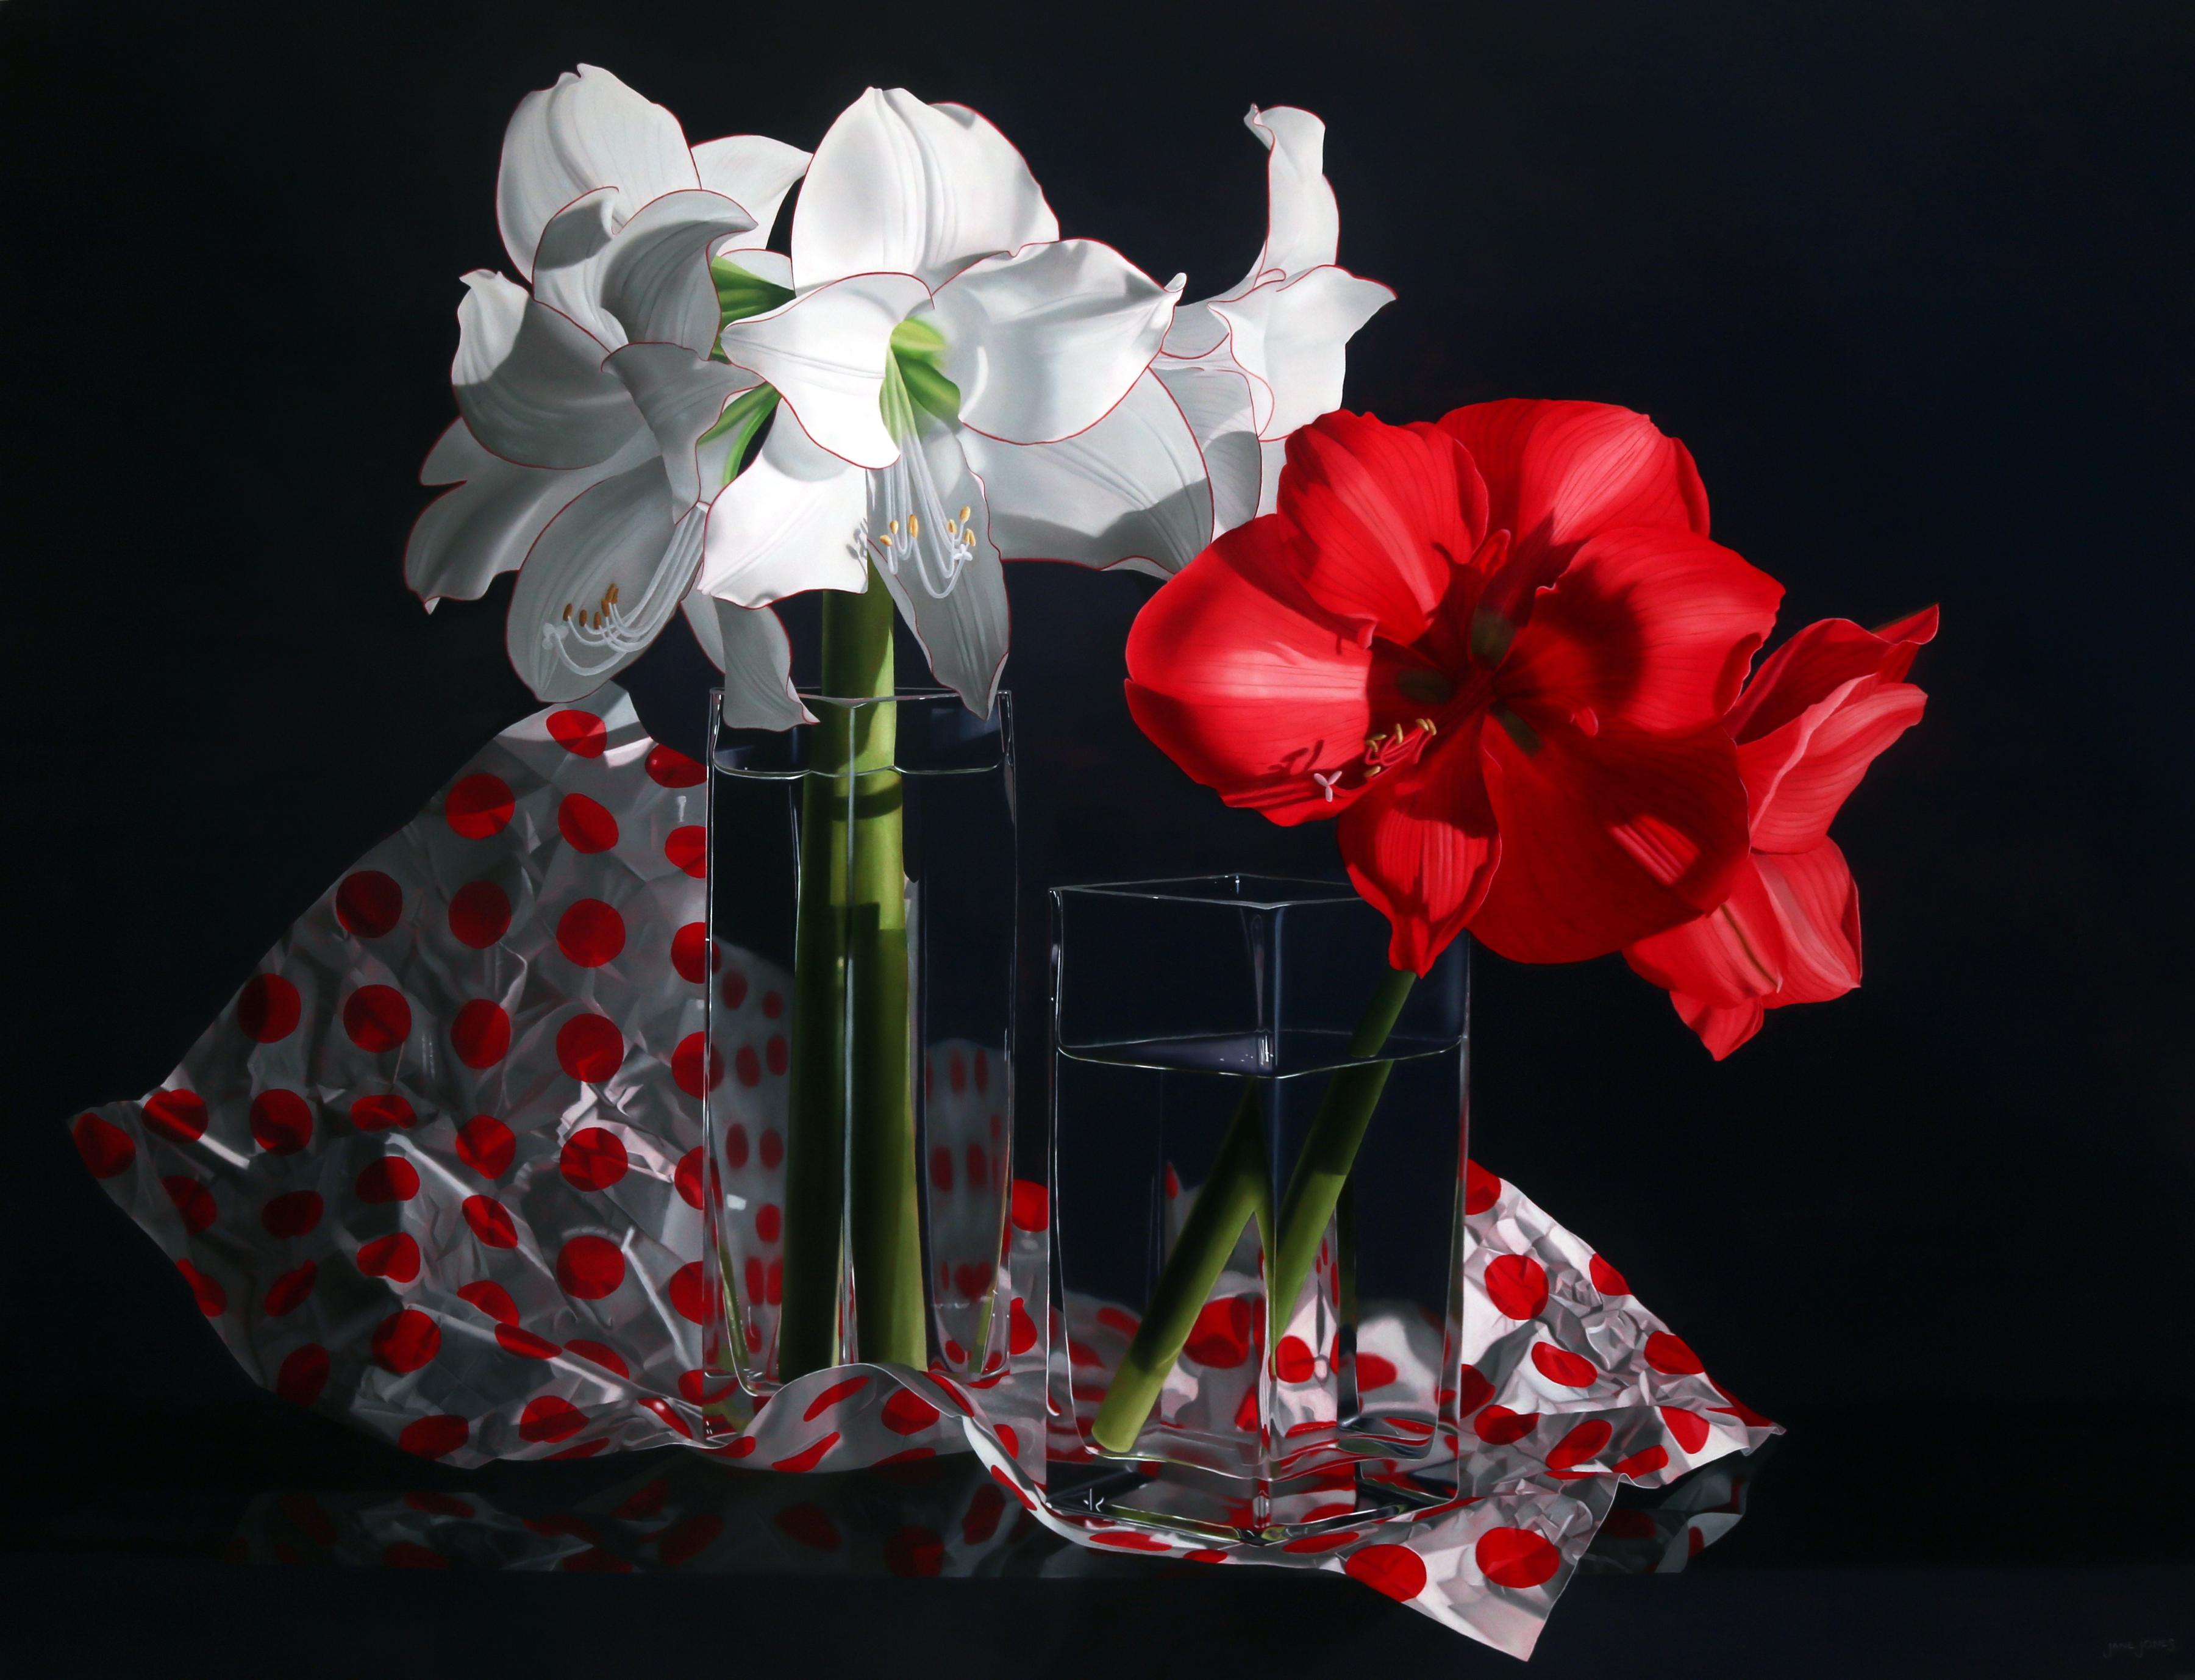 Jane Jones Still-Life Painting - "Party of Two"